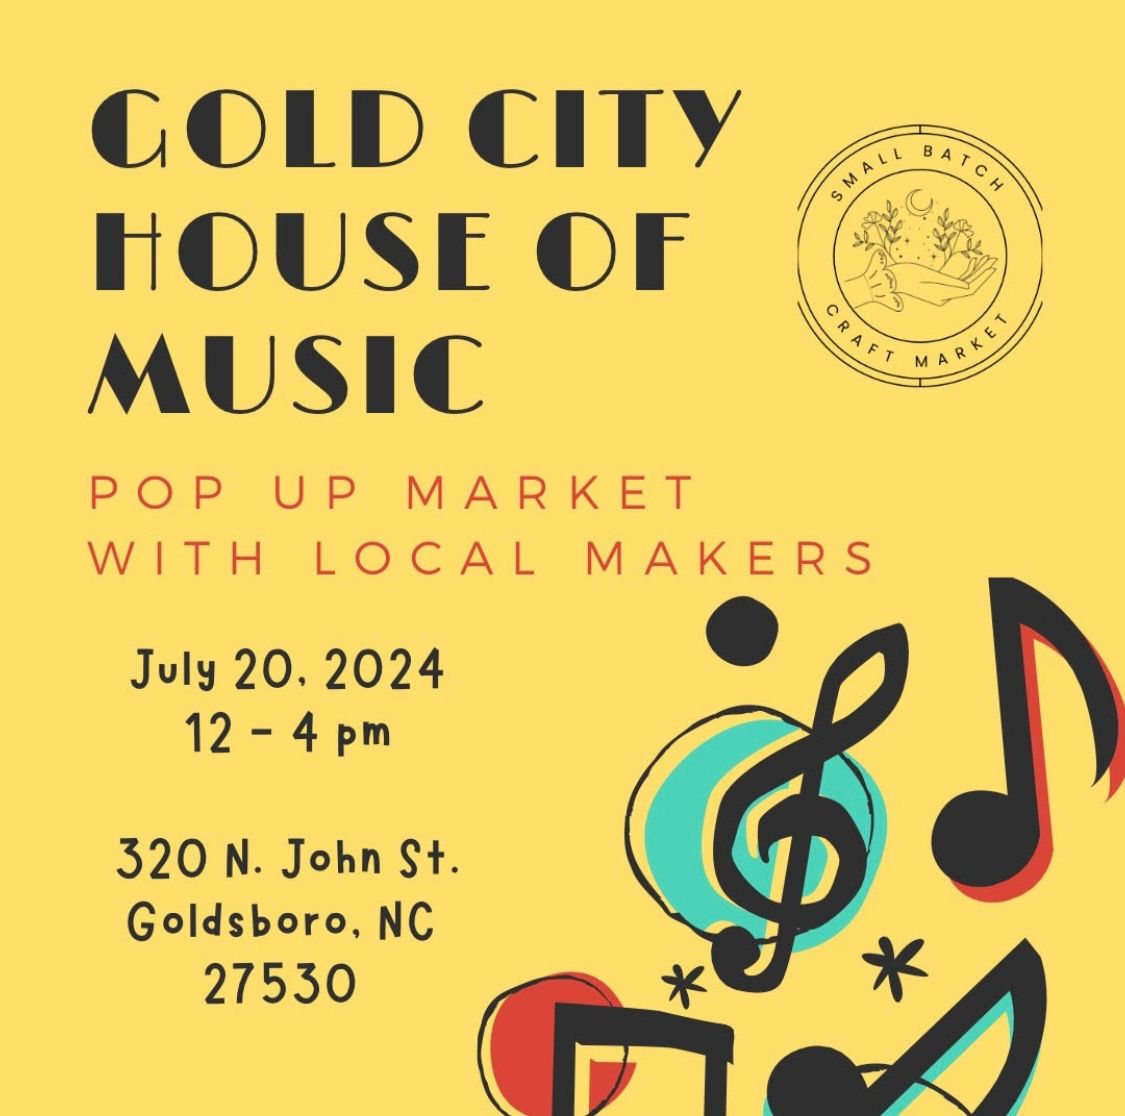 Pop Up Market @ Gold City House of Music